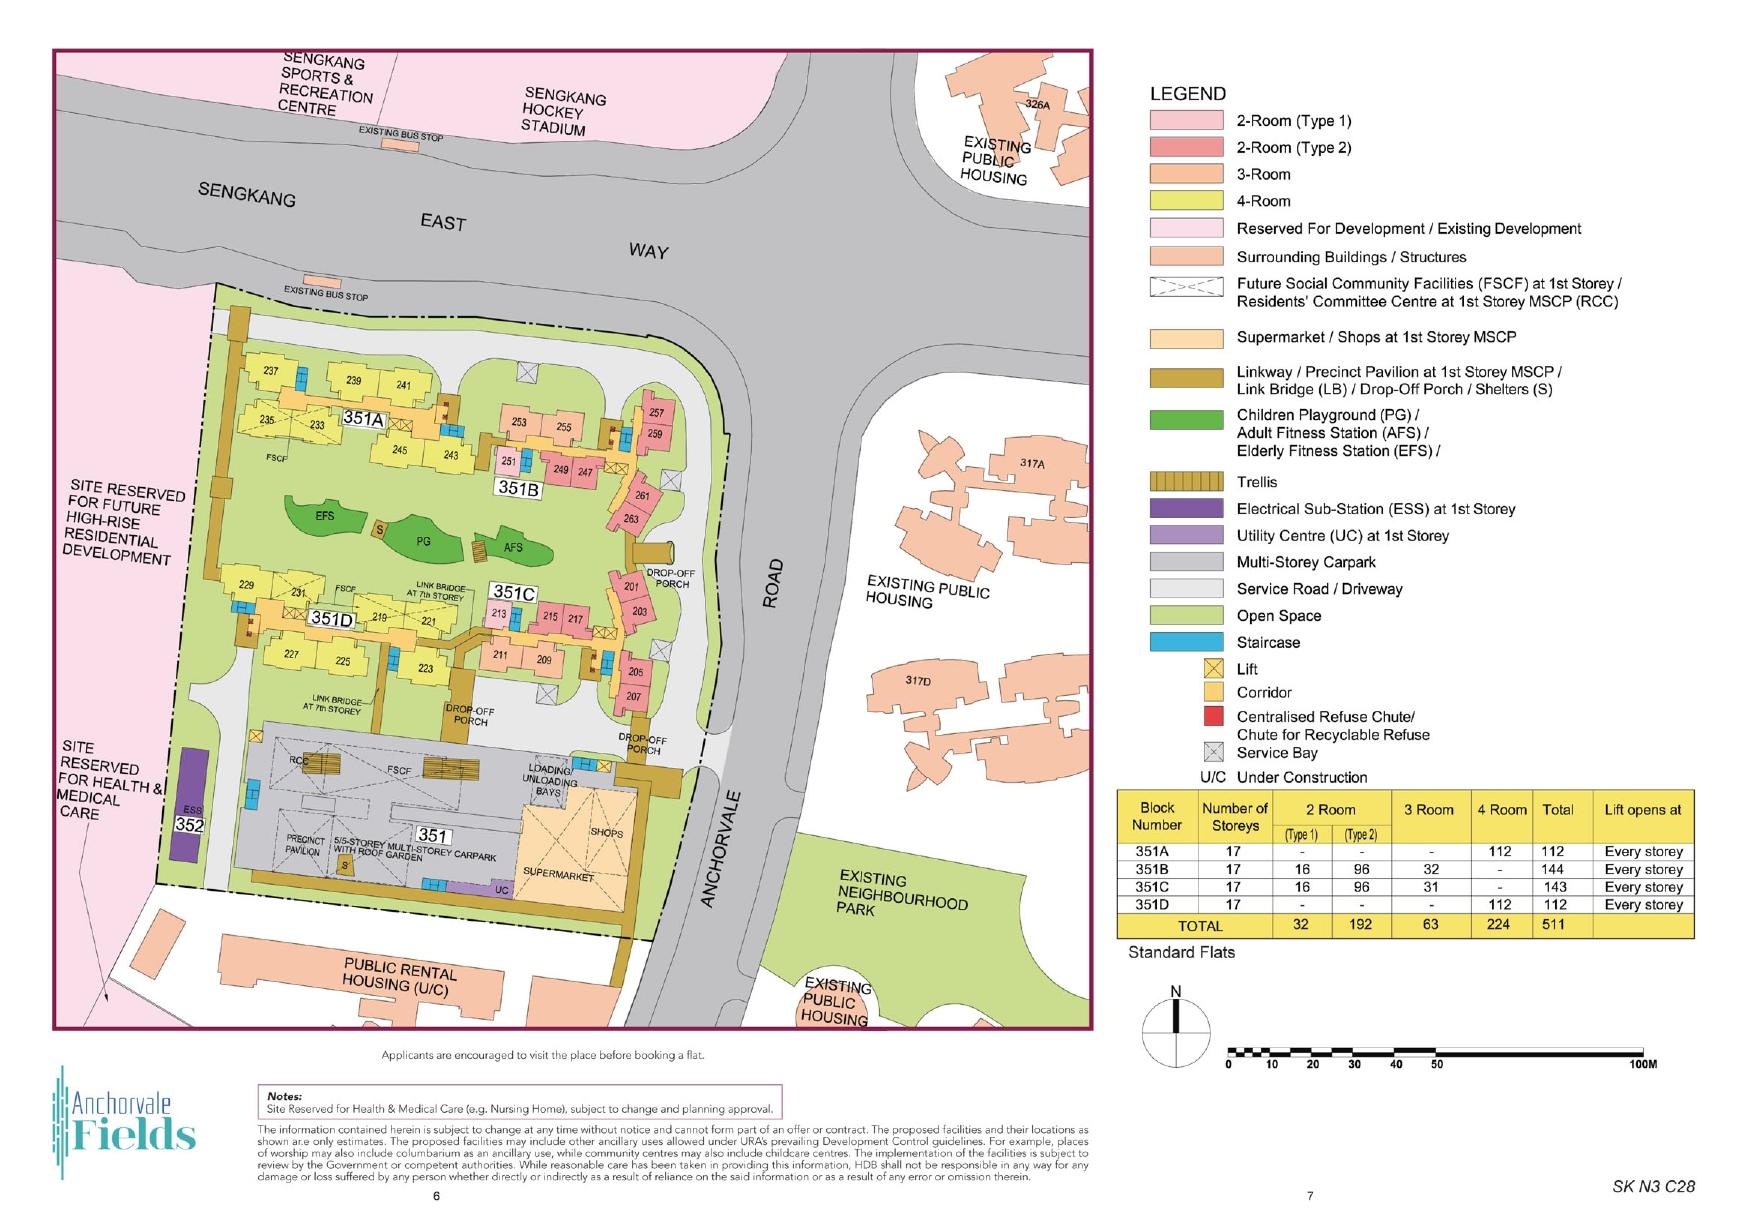 Anchorvale Fields Site Plan